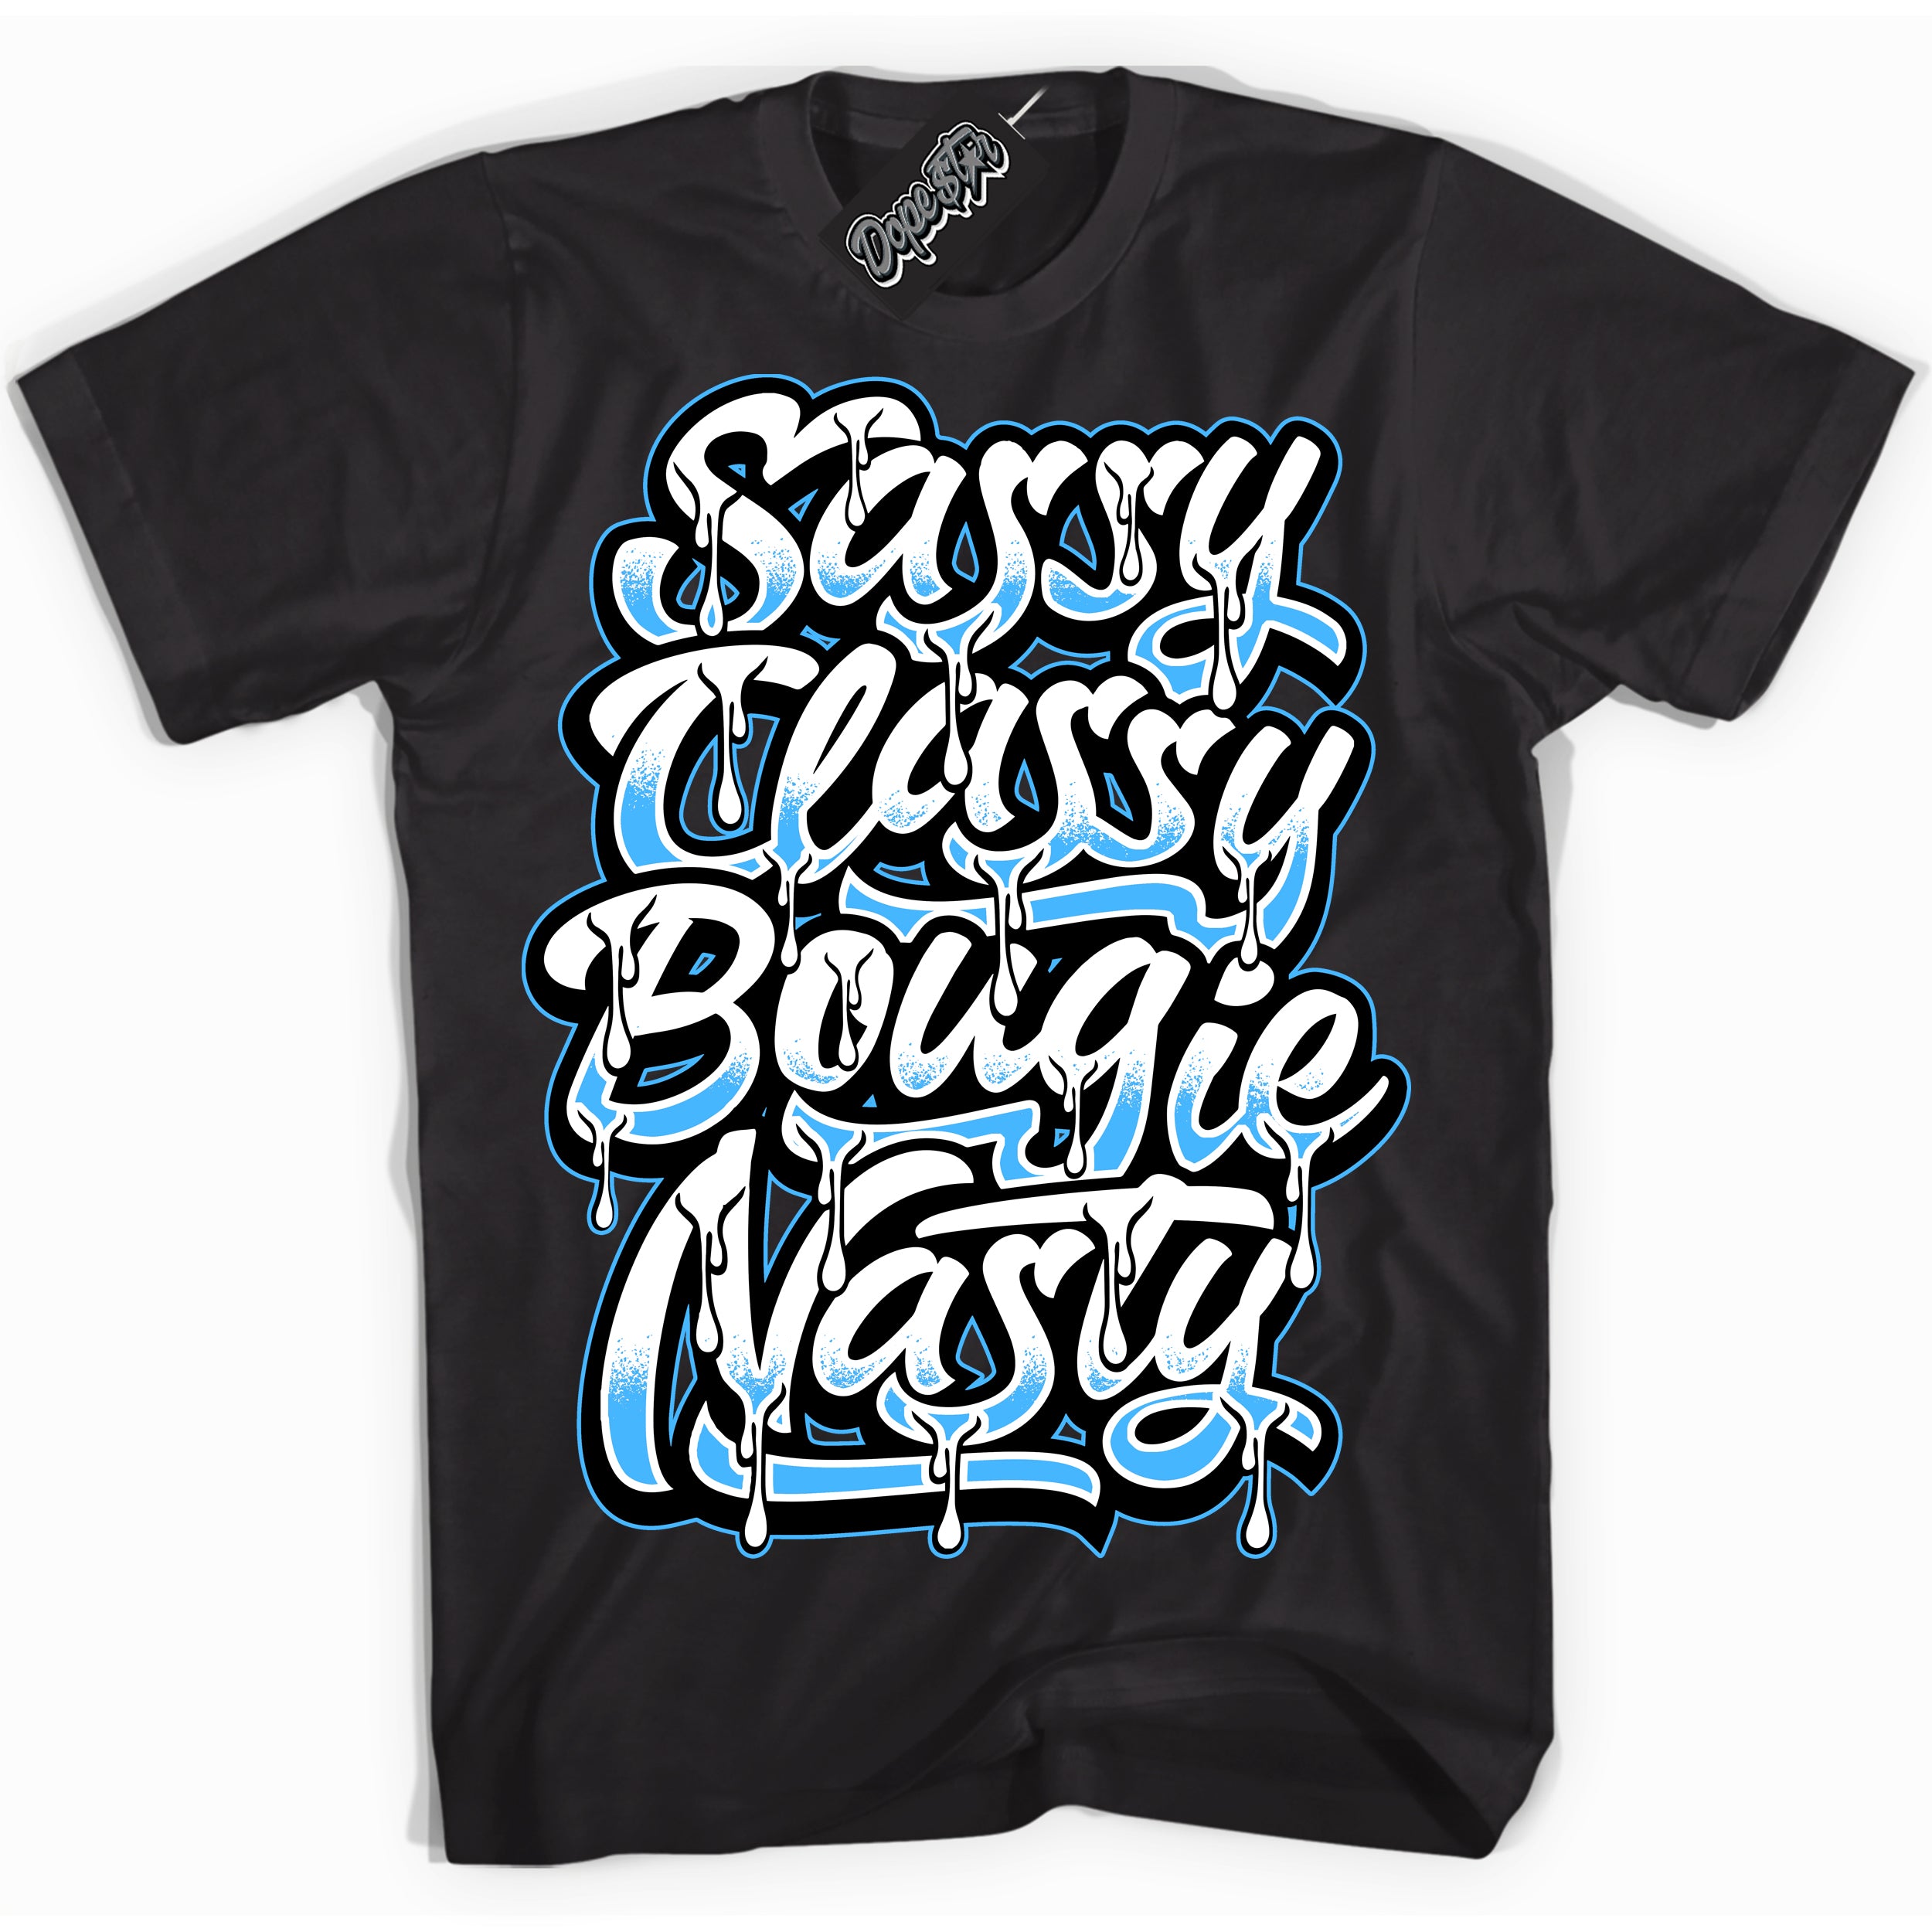 Cool Black graphic tee with “ Sassy Classy ” design, that perfectly matches Powder Blue 9s sneakers 